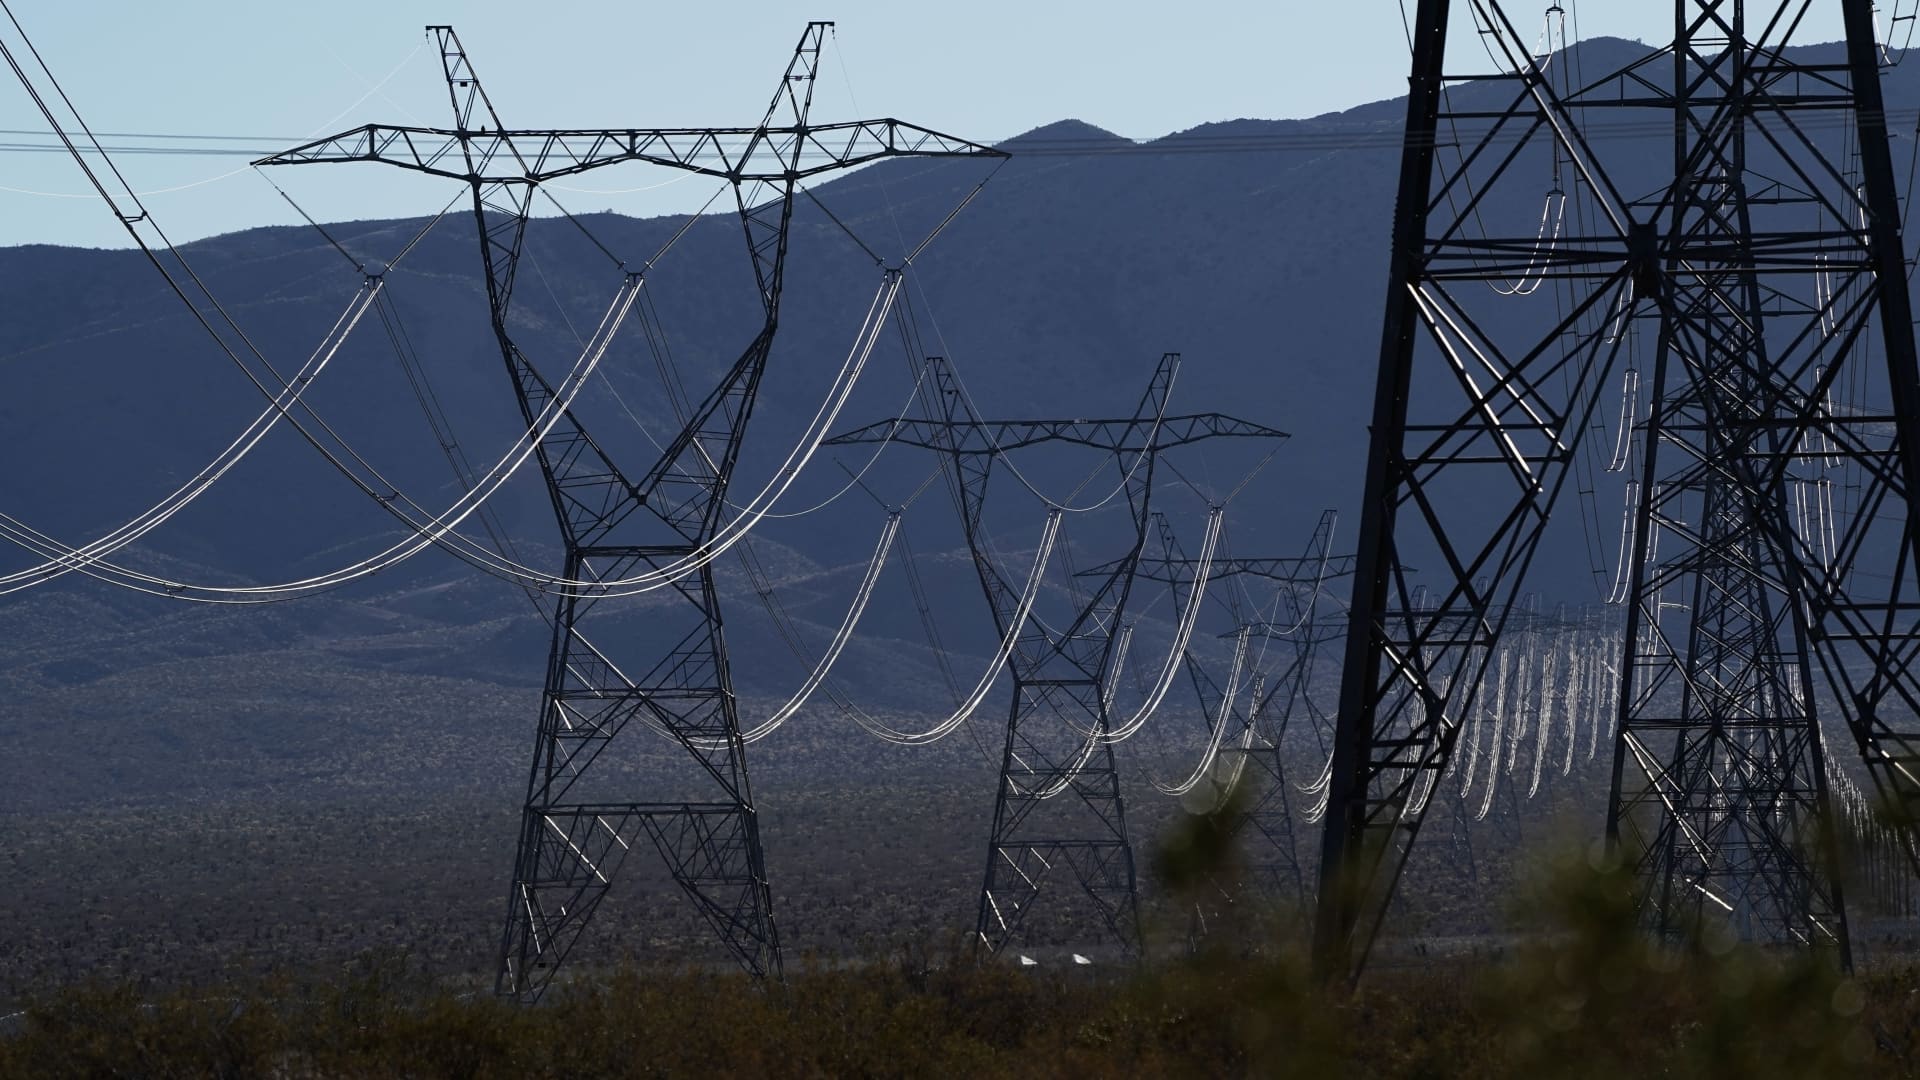 Power lines and transmission towers near the Ivanpah Solar Electric Generating System in the Mojave Desert in San Bernardino County, California, U.S., on Saturday, Feb. 19. 2022. California aims to end greenhouse gas emissions from its electricity grid by 2045.